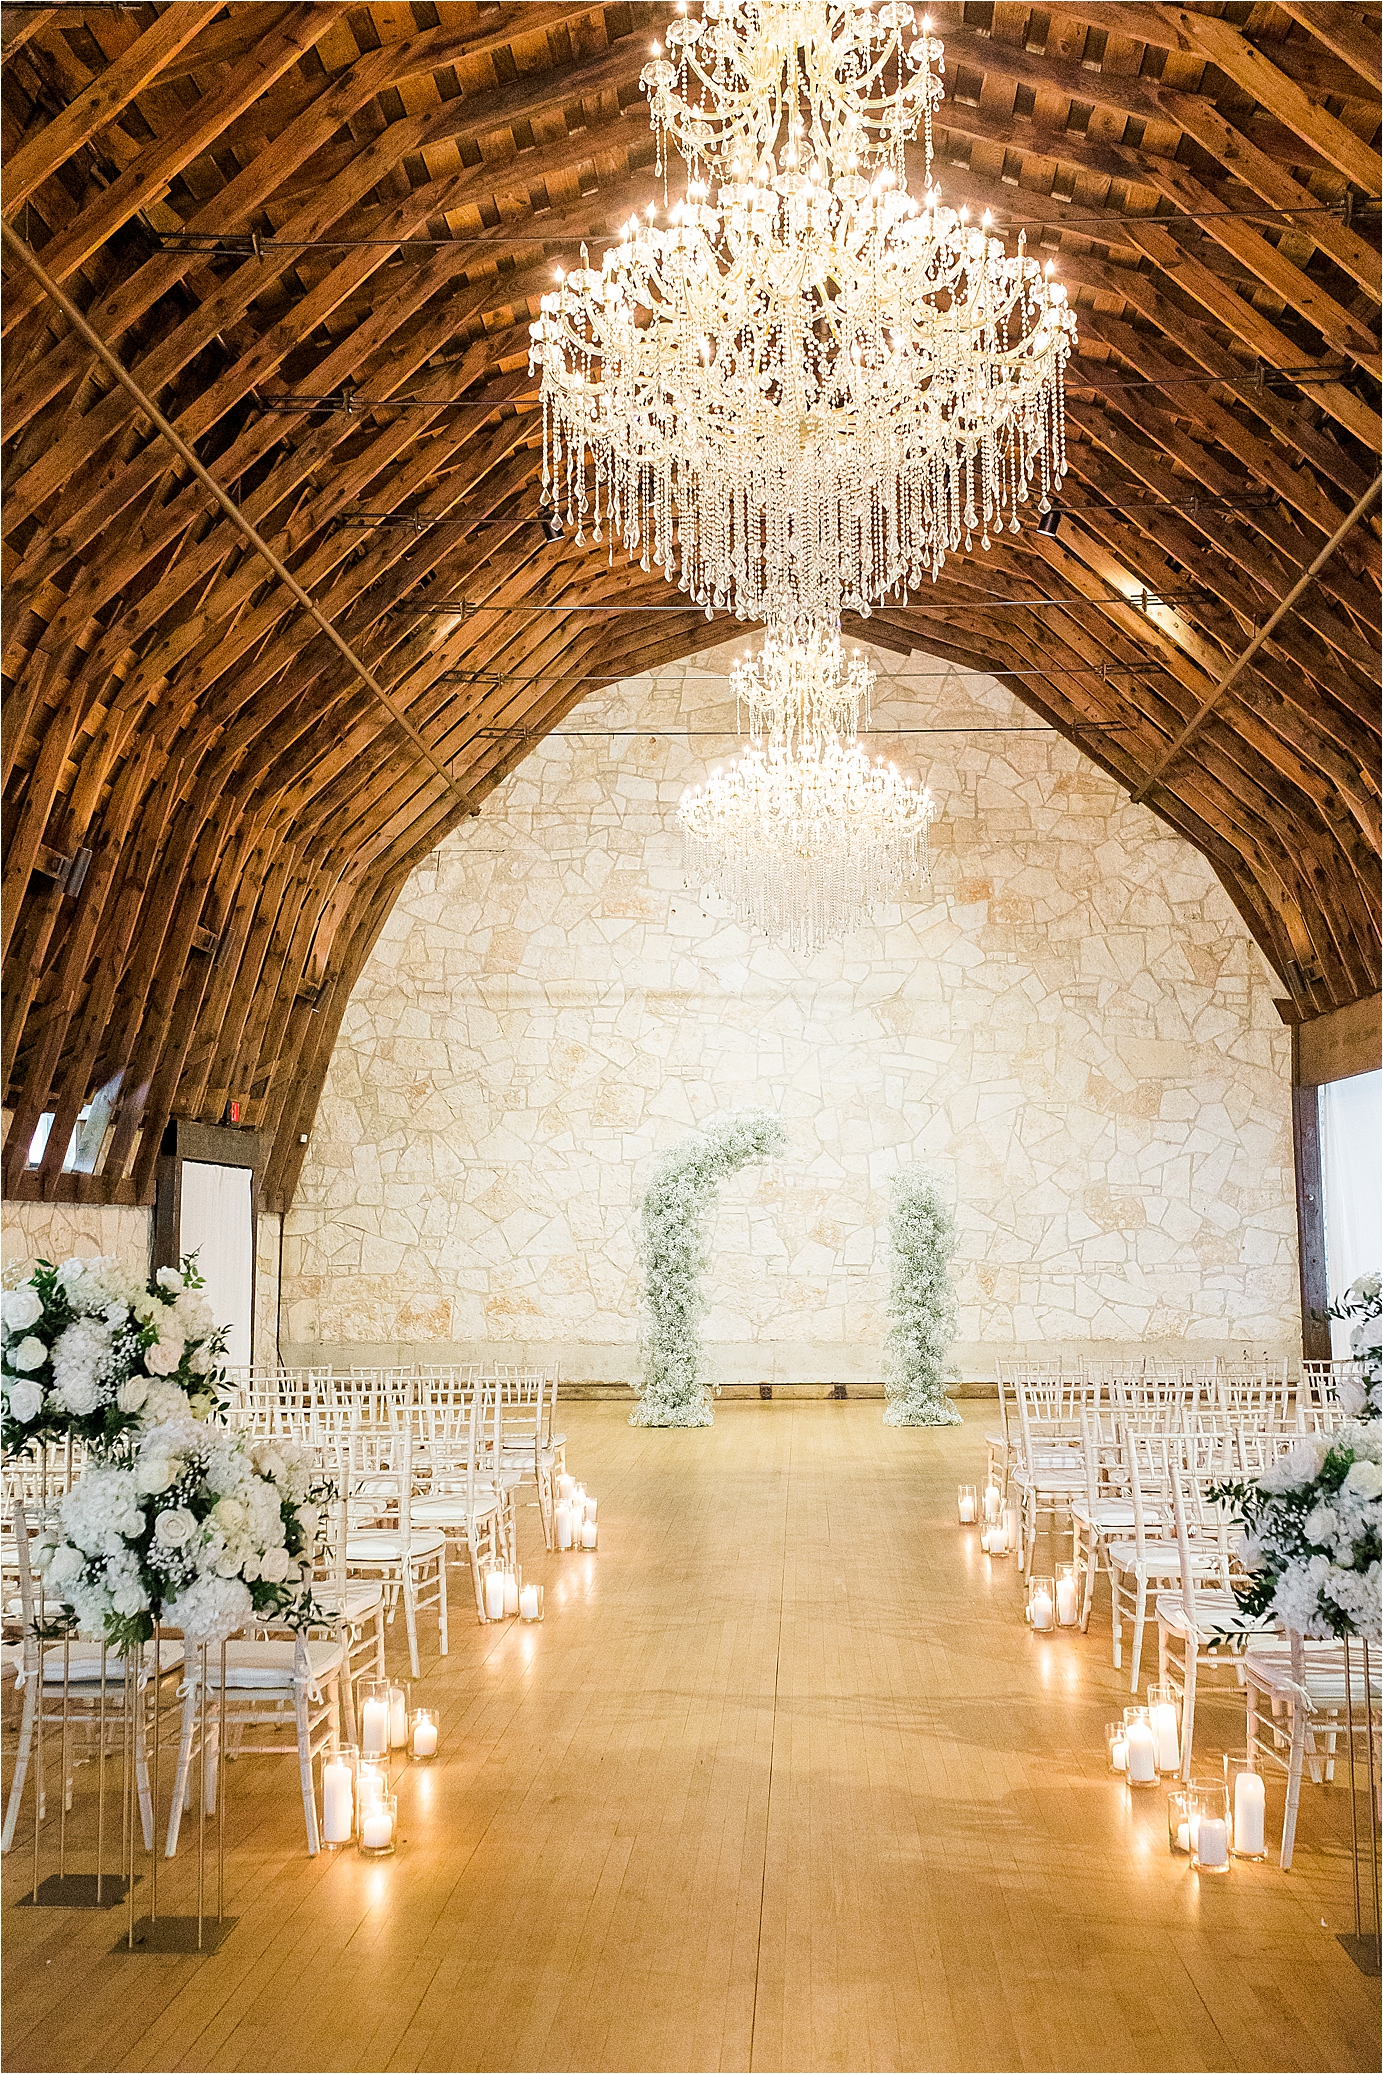 Wedding Venue with a white flower arch, chandeliers, candles in a barn type setting at Brodie Homestead in Austin, Texas